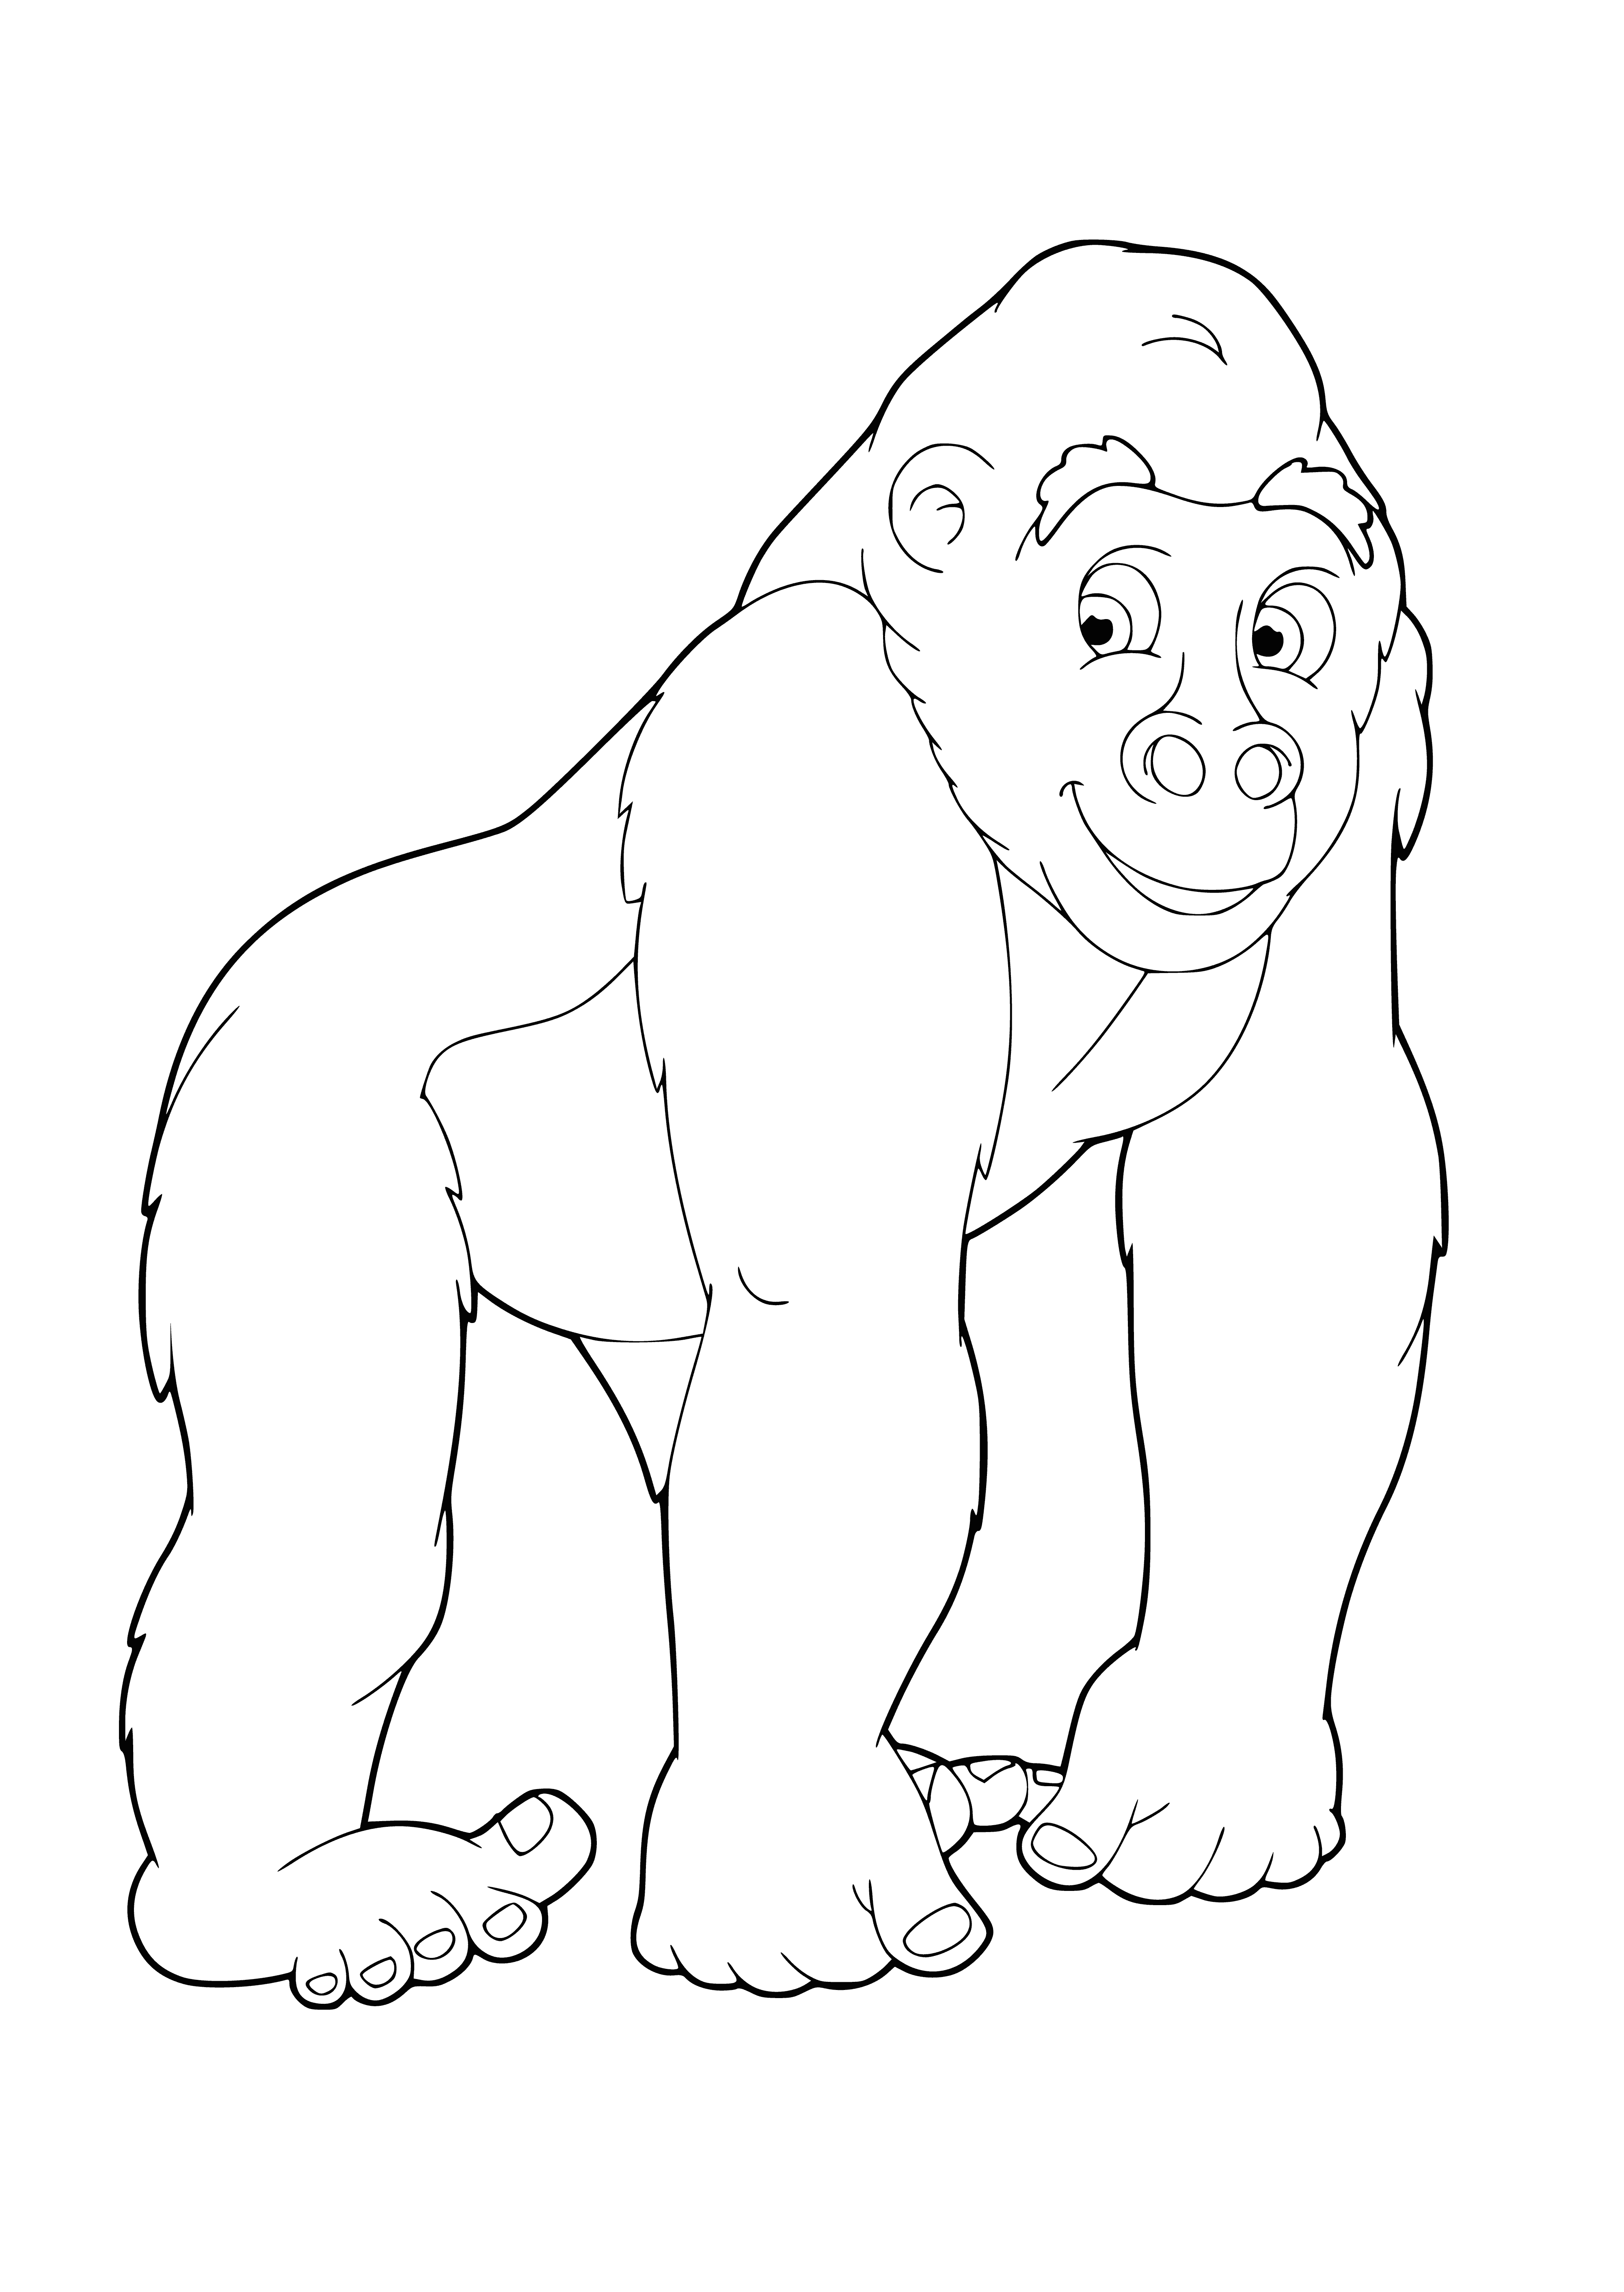 coloring page: Big brown monkey on a tree stump; green plant nearby. #nature